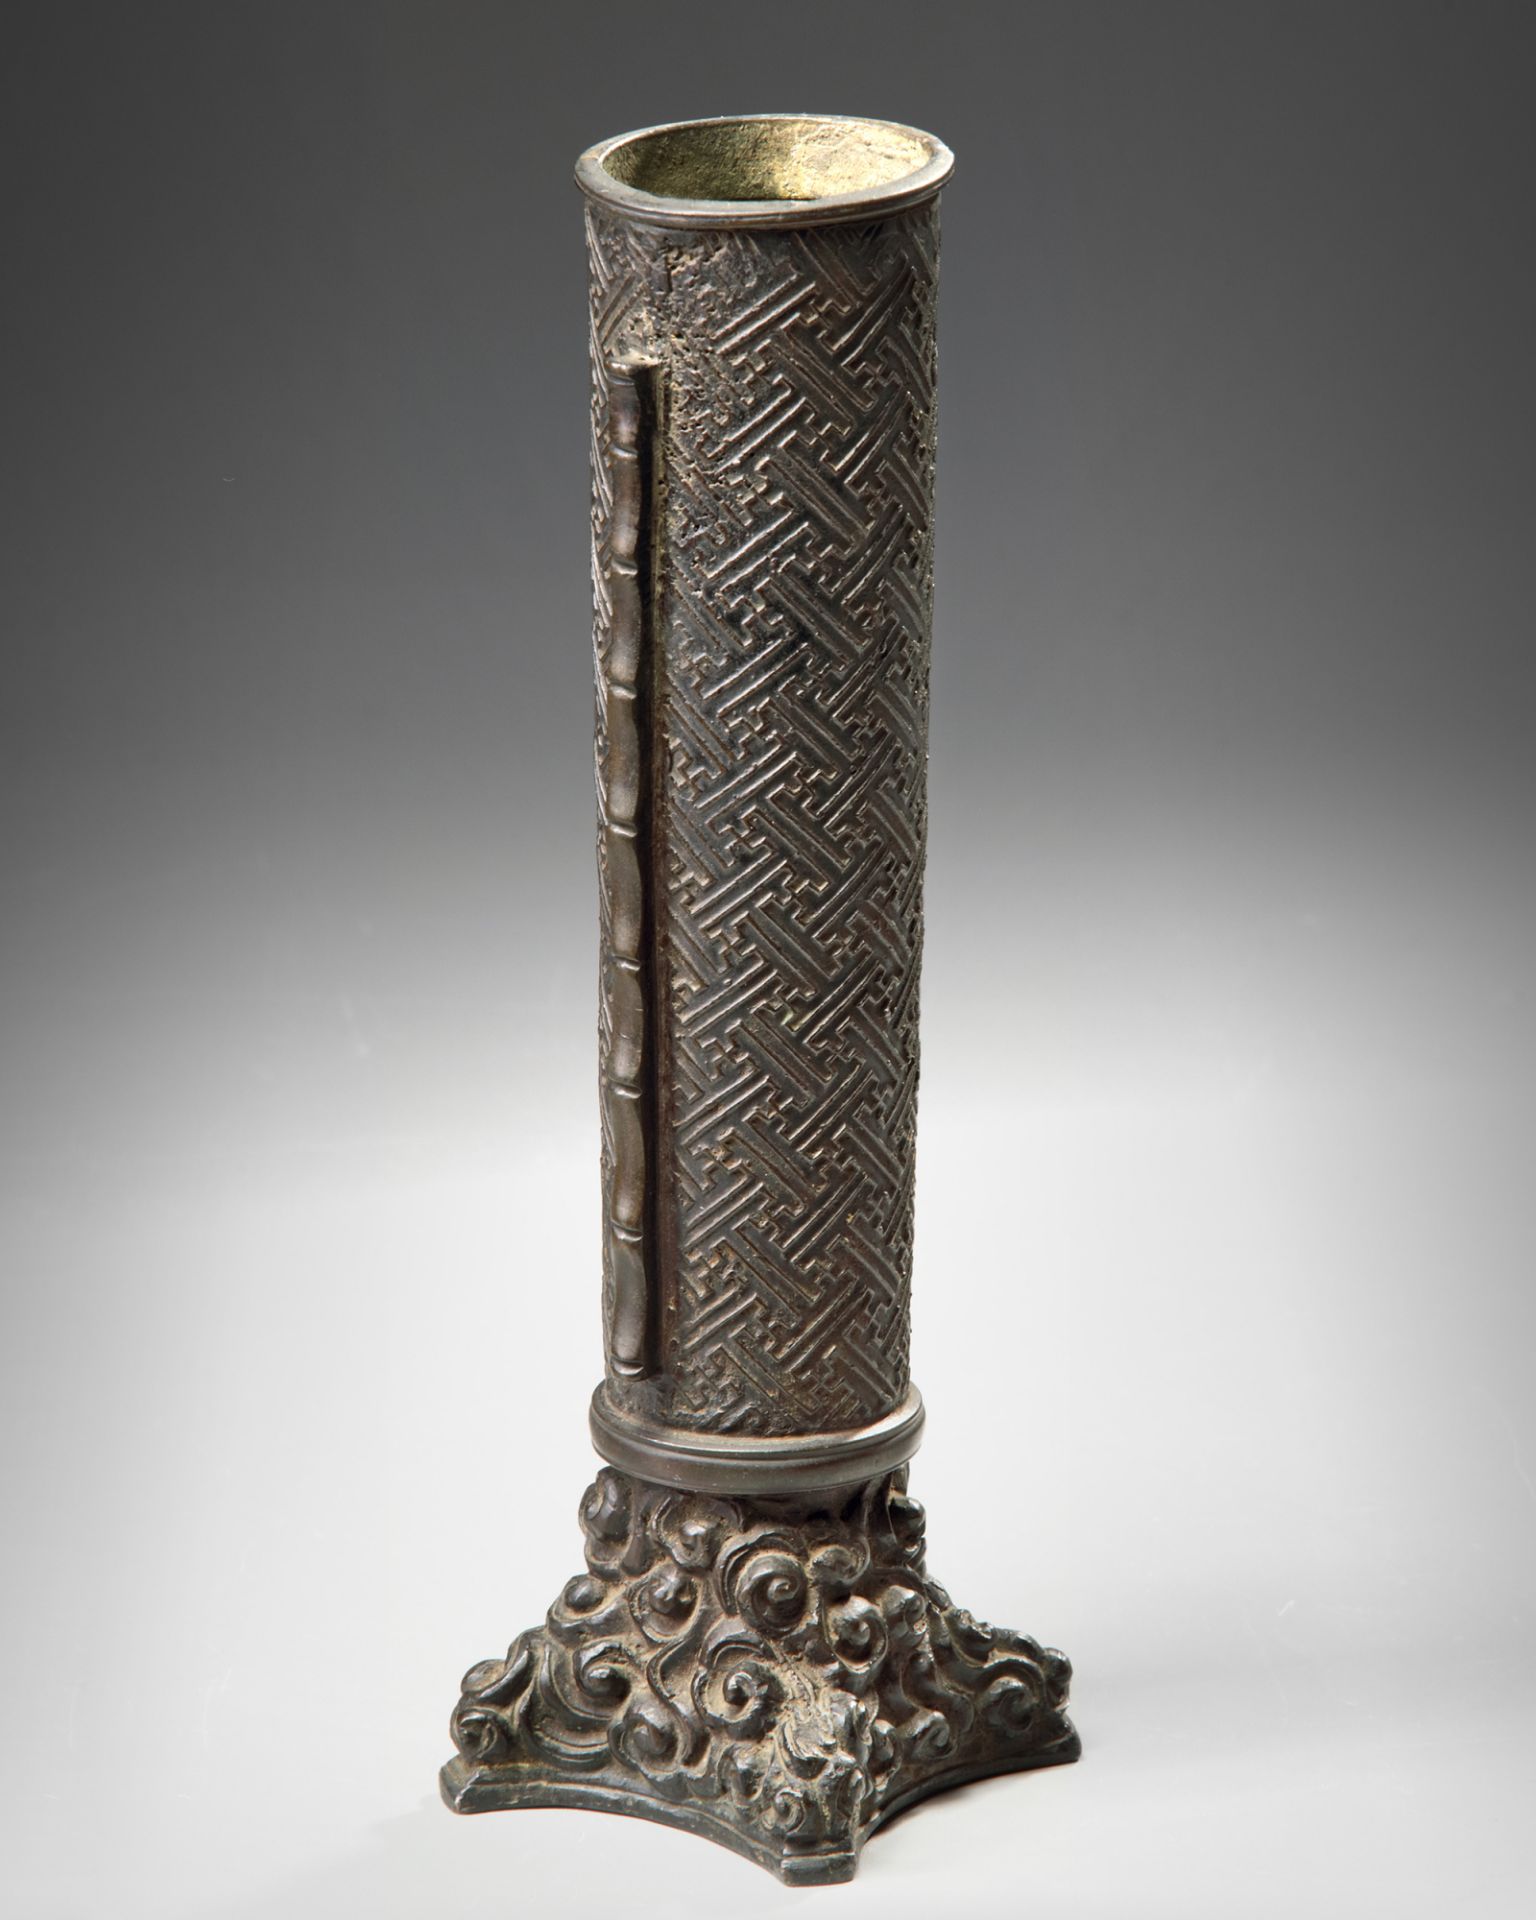 A BLACK BRONZE JAPANESE 'CHINESE STYLE' VASE IN THE SHAPE OF A PILLAR - Image 3 of 3